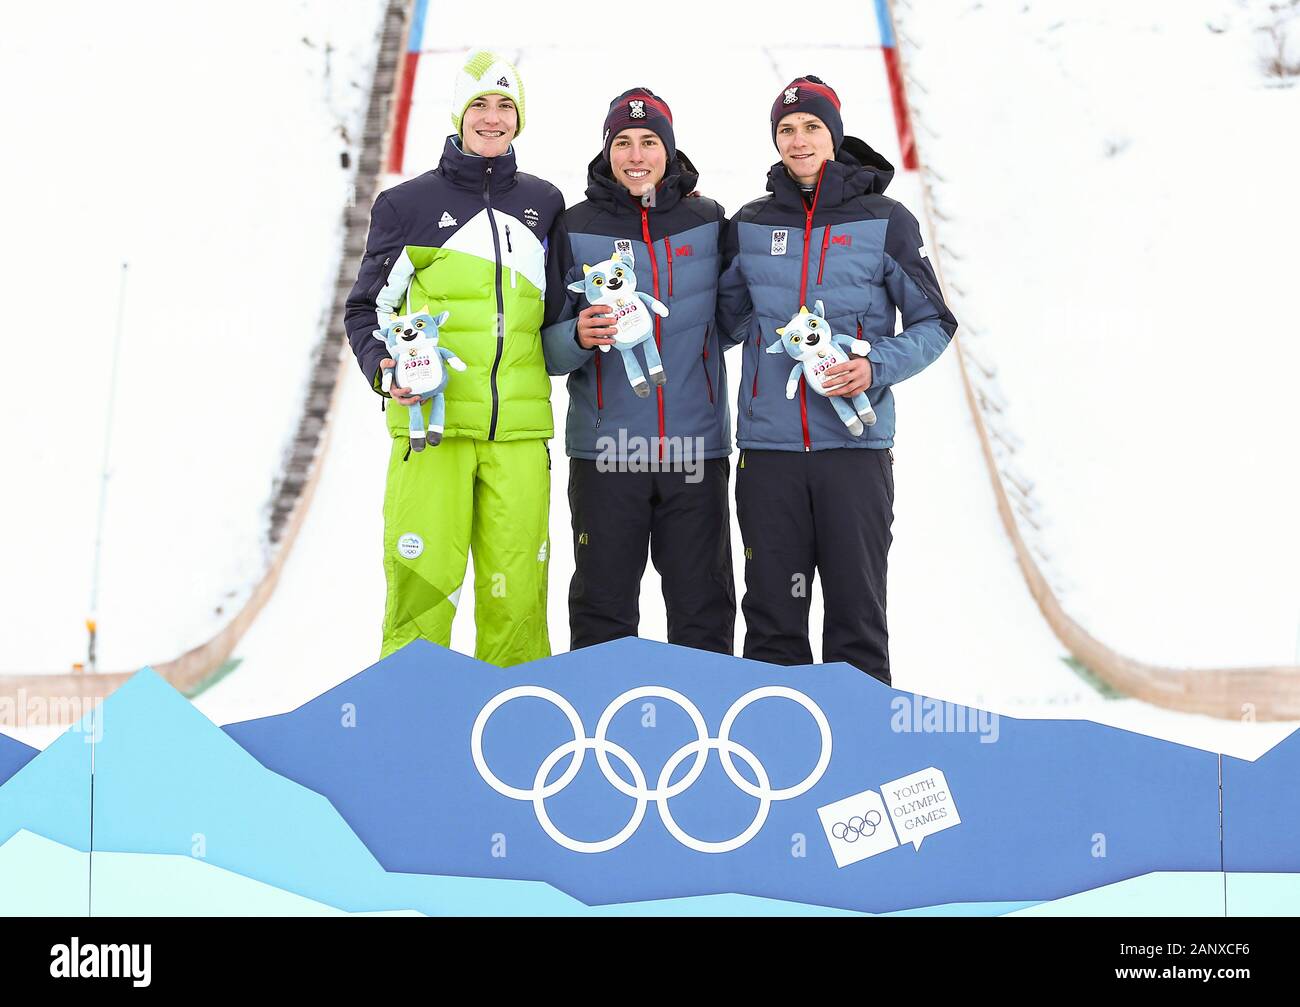 Les Rousses, France. 19th Jan, 2020. Gold medalist Marco Woergoetter (C) of Austria, silver medelist Mark Hafnar (L) of Slovenia and bronze medalist David Haagen of Austria pose for photos during the mascot ceremony for men's individual ski jumping event at 3rd Winter Youth Olympic Games at Les Tuffes Nordic Centre in Les Rousses, France, Jan. 19, 2020. Credit: Shan Yuqi/Xinhua/Alamy Live News Stock Photo